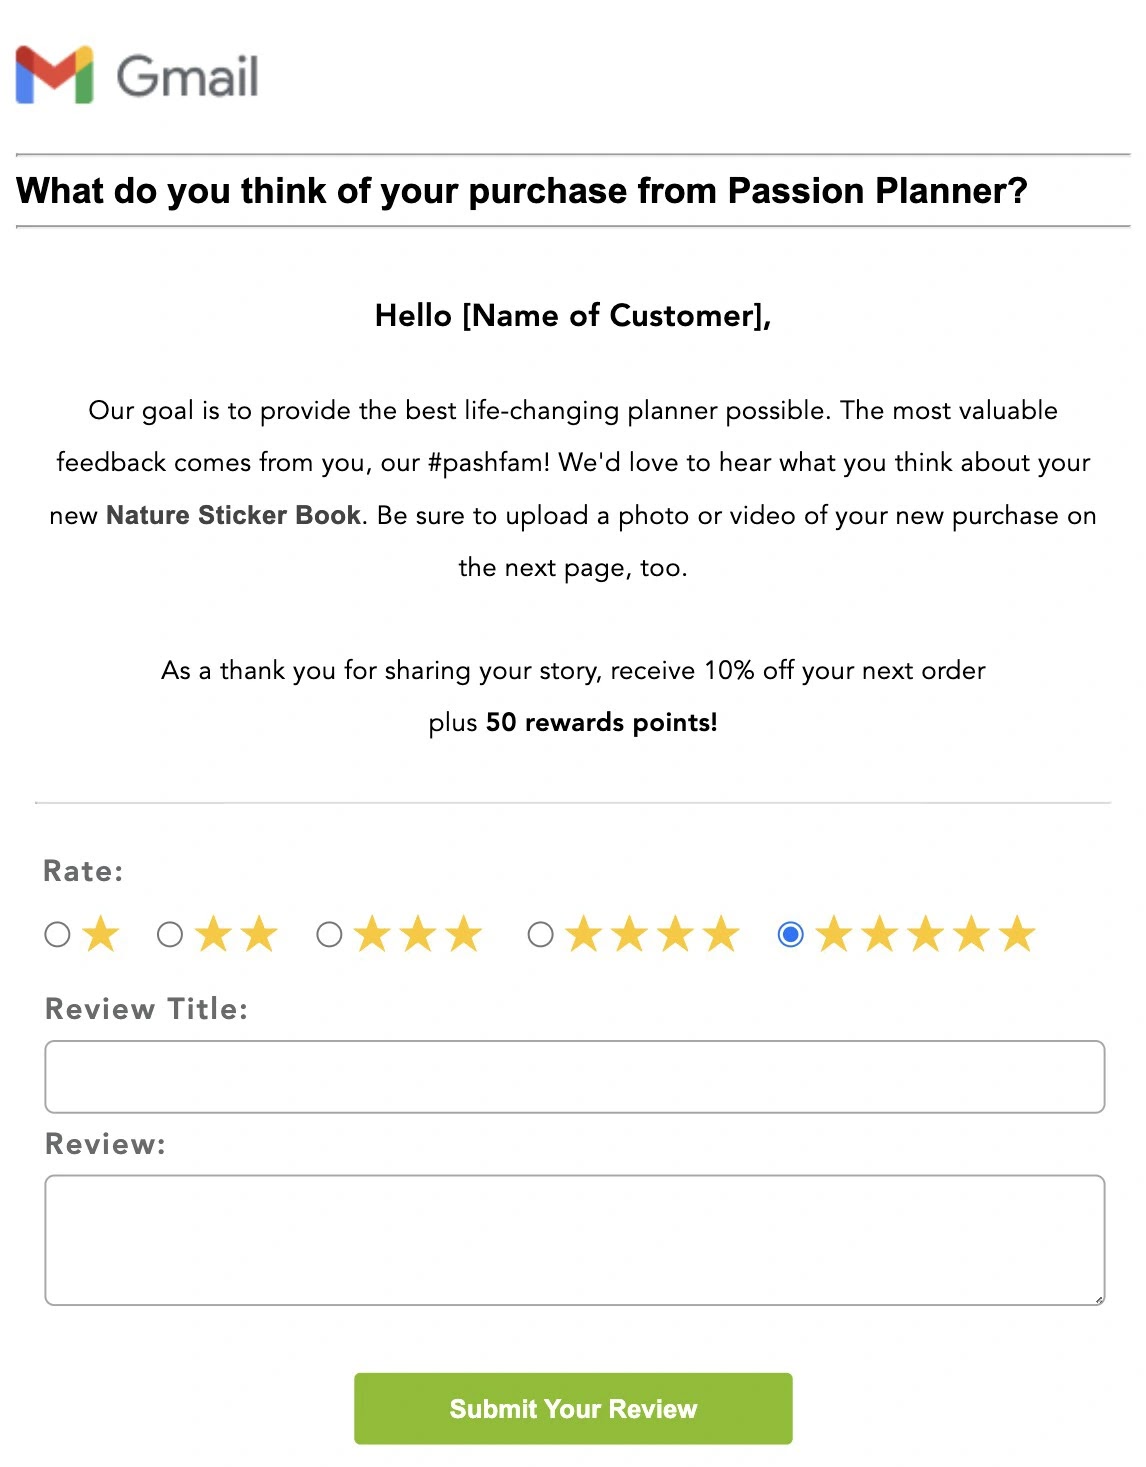 Passion Planner's email asking for a customer review